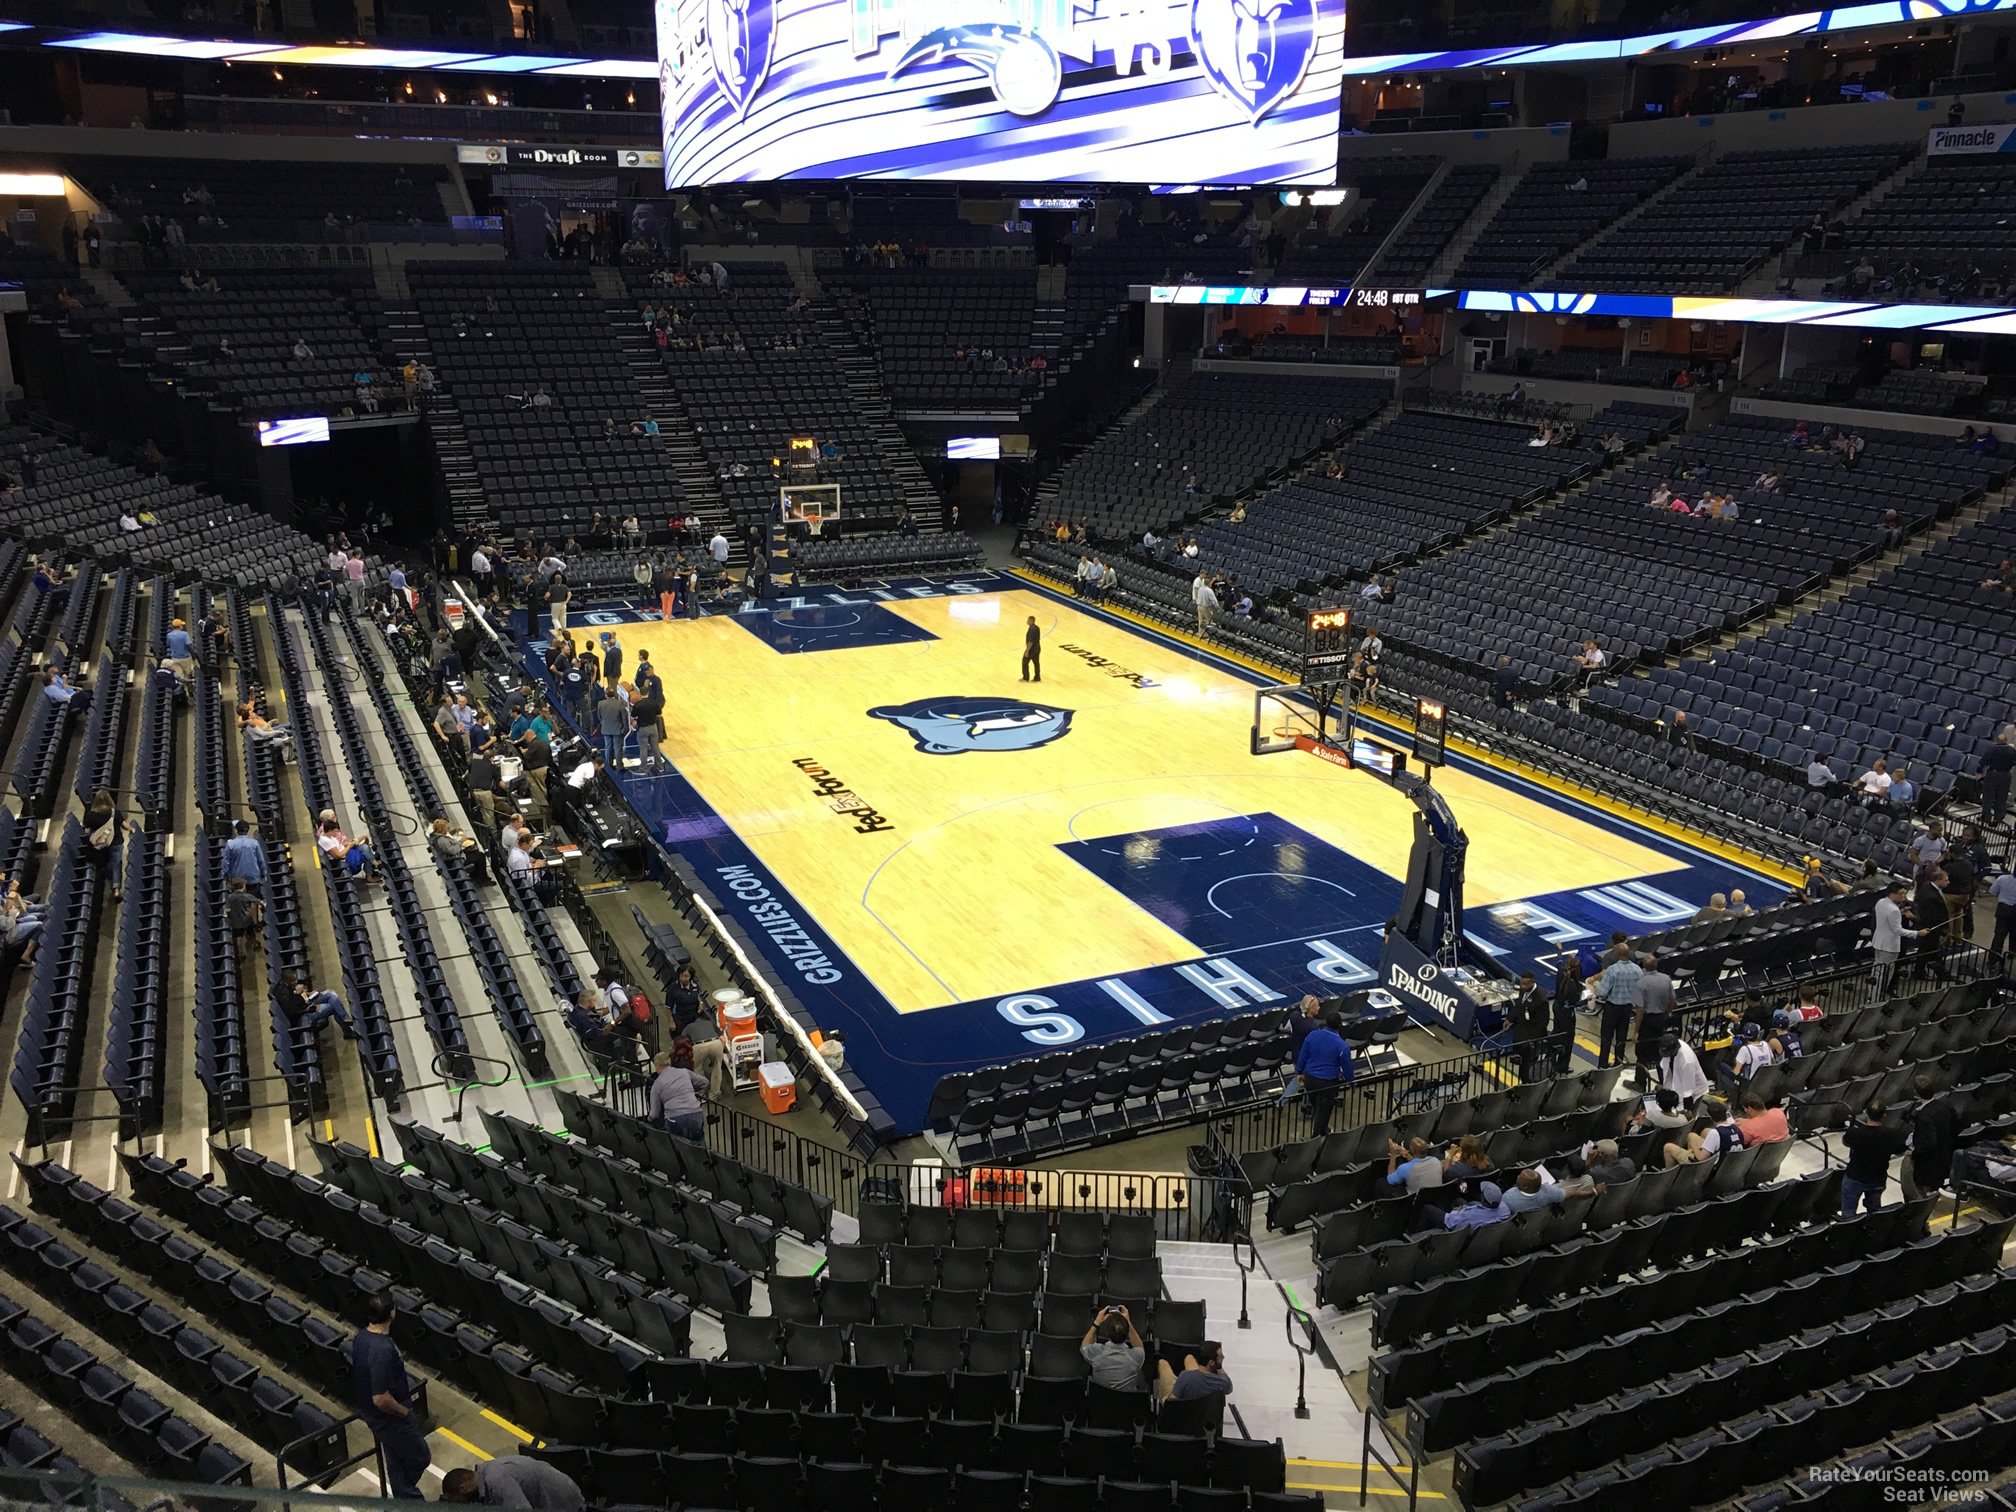 section 108a seat view  for basketball - fedex forum